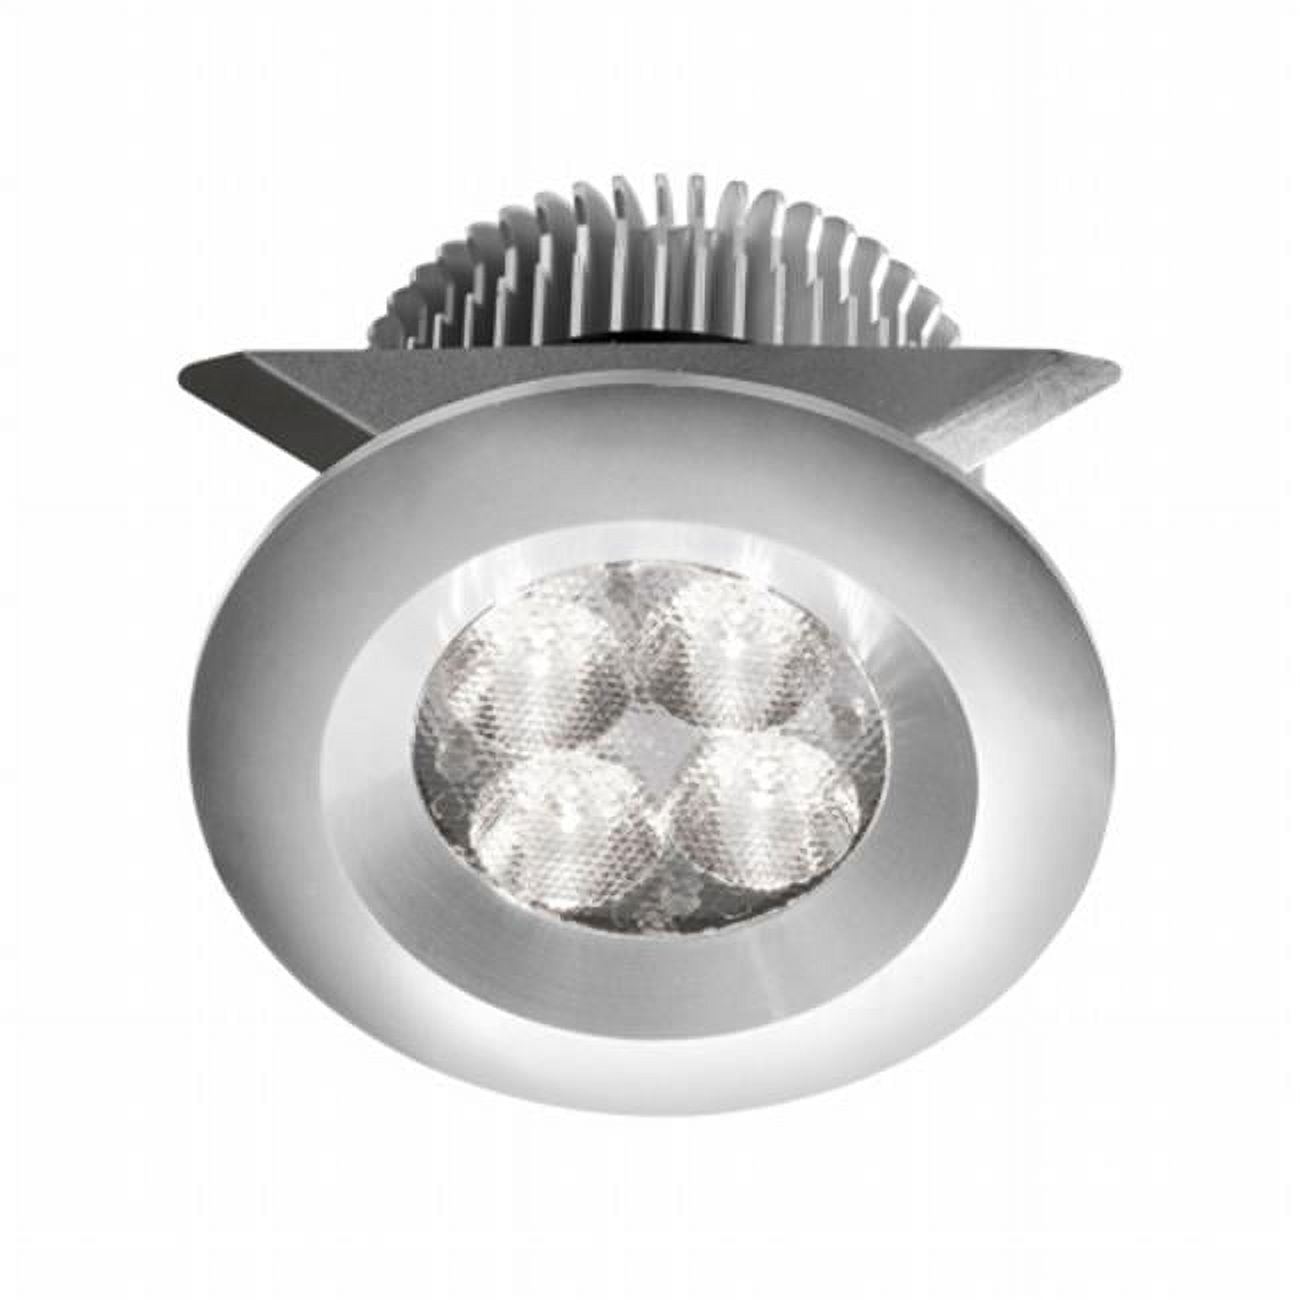 Mp-led-8-al Aluminum 2 X 4w 3000k, Cri80 Plus, 25 Deg Beam, 24v Dc Input With Male Connector, 18 In. Dimmable Lead Wire